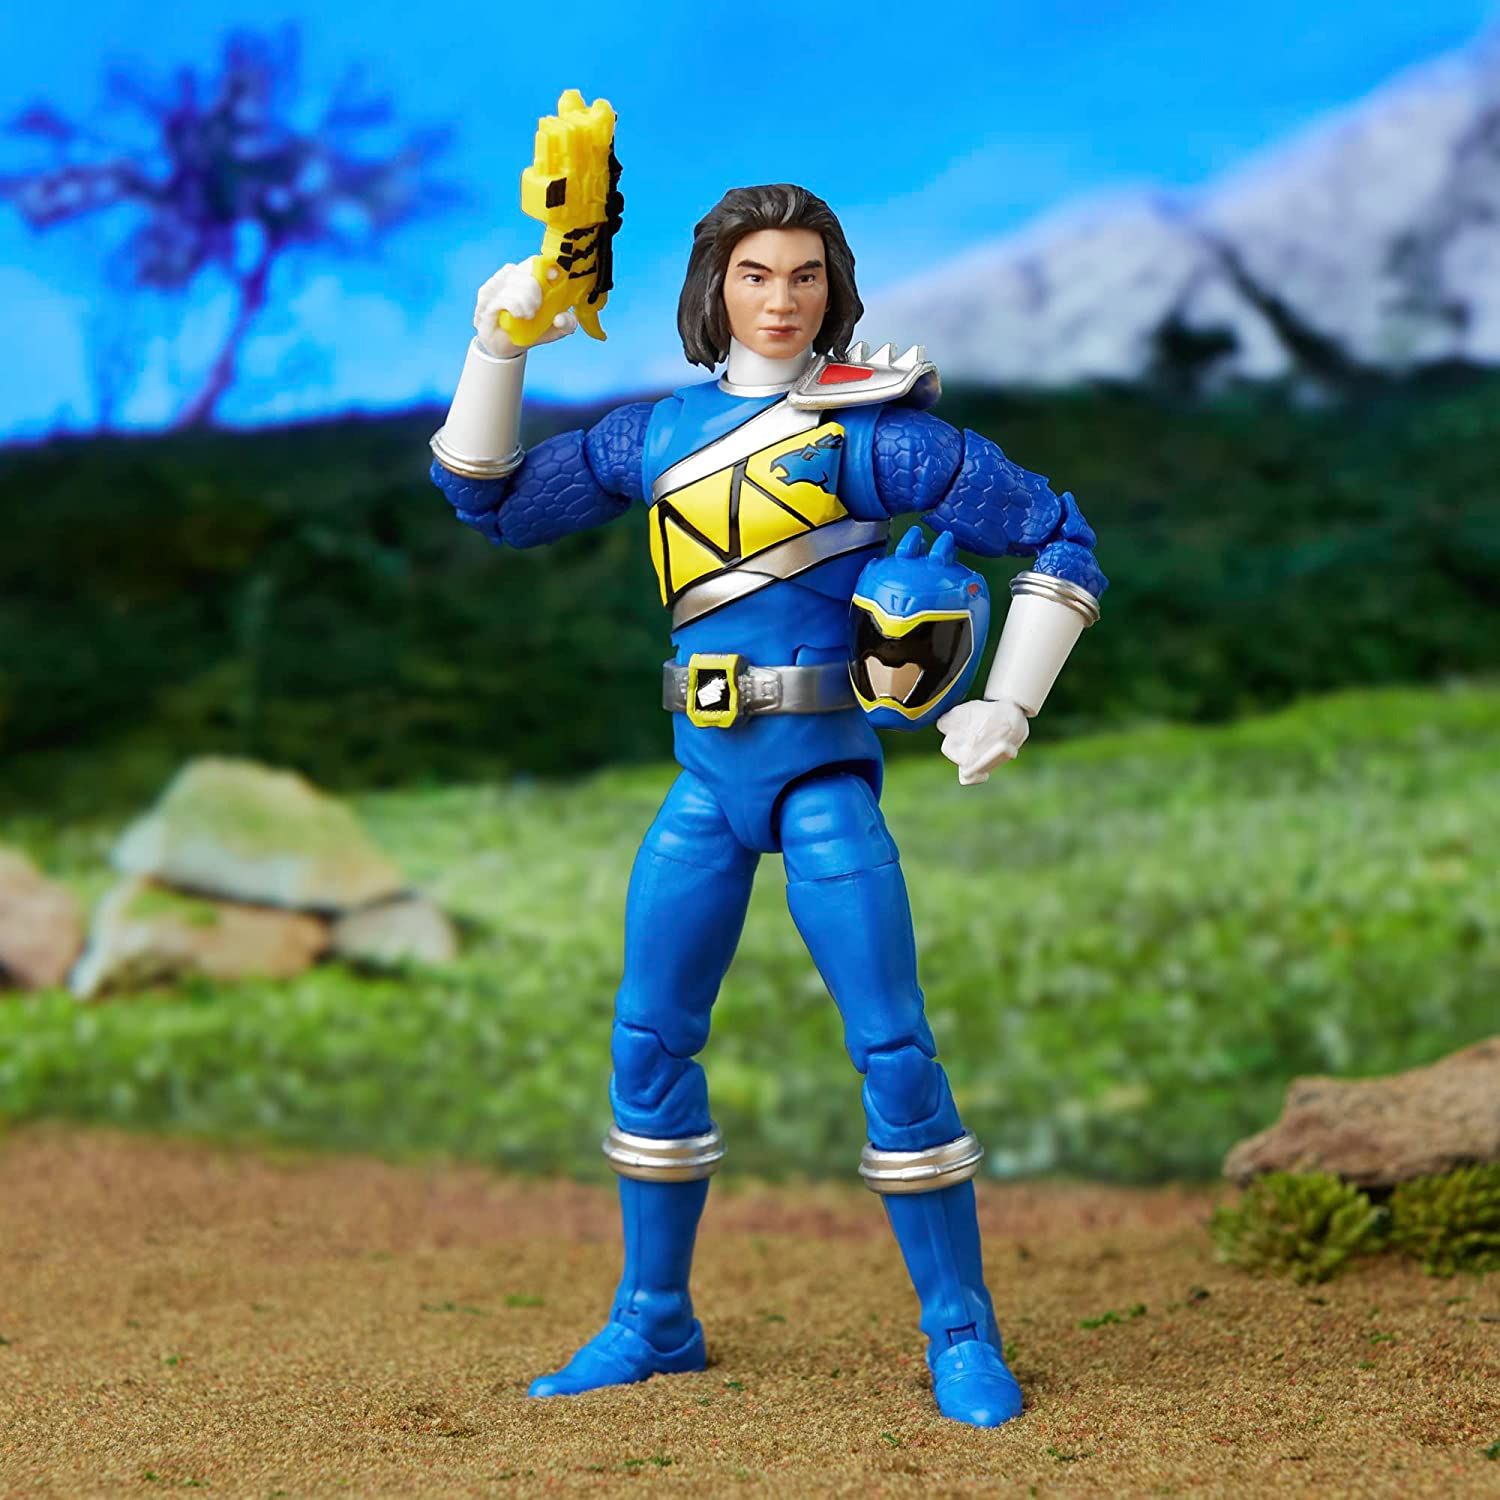 Power Rangers Lightning Collection Dino Charge Blue Ranger 6-inch Action Figure